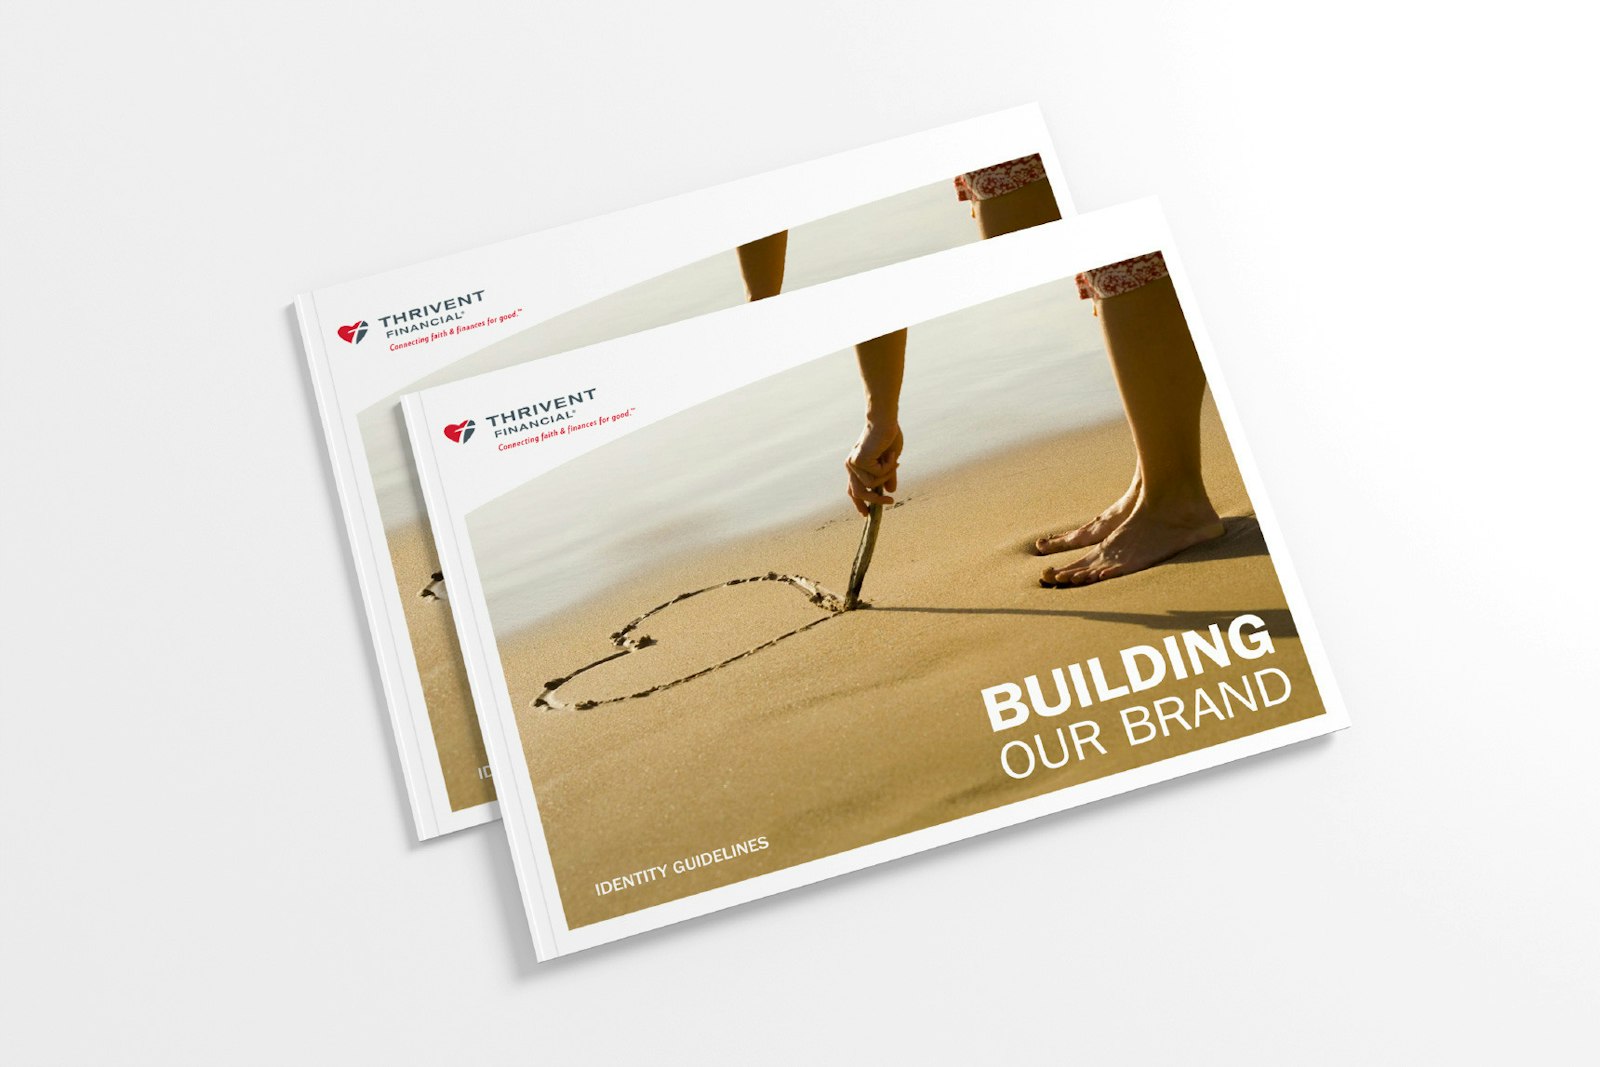 A brand guidelines for Thrivent Financial reading building on brand with the logo.